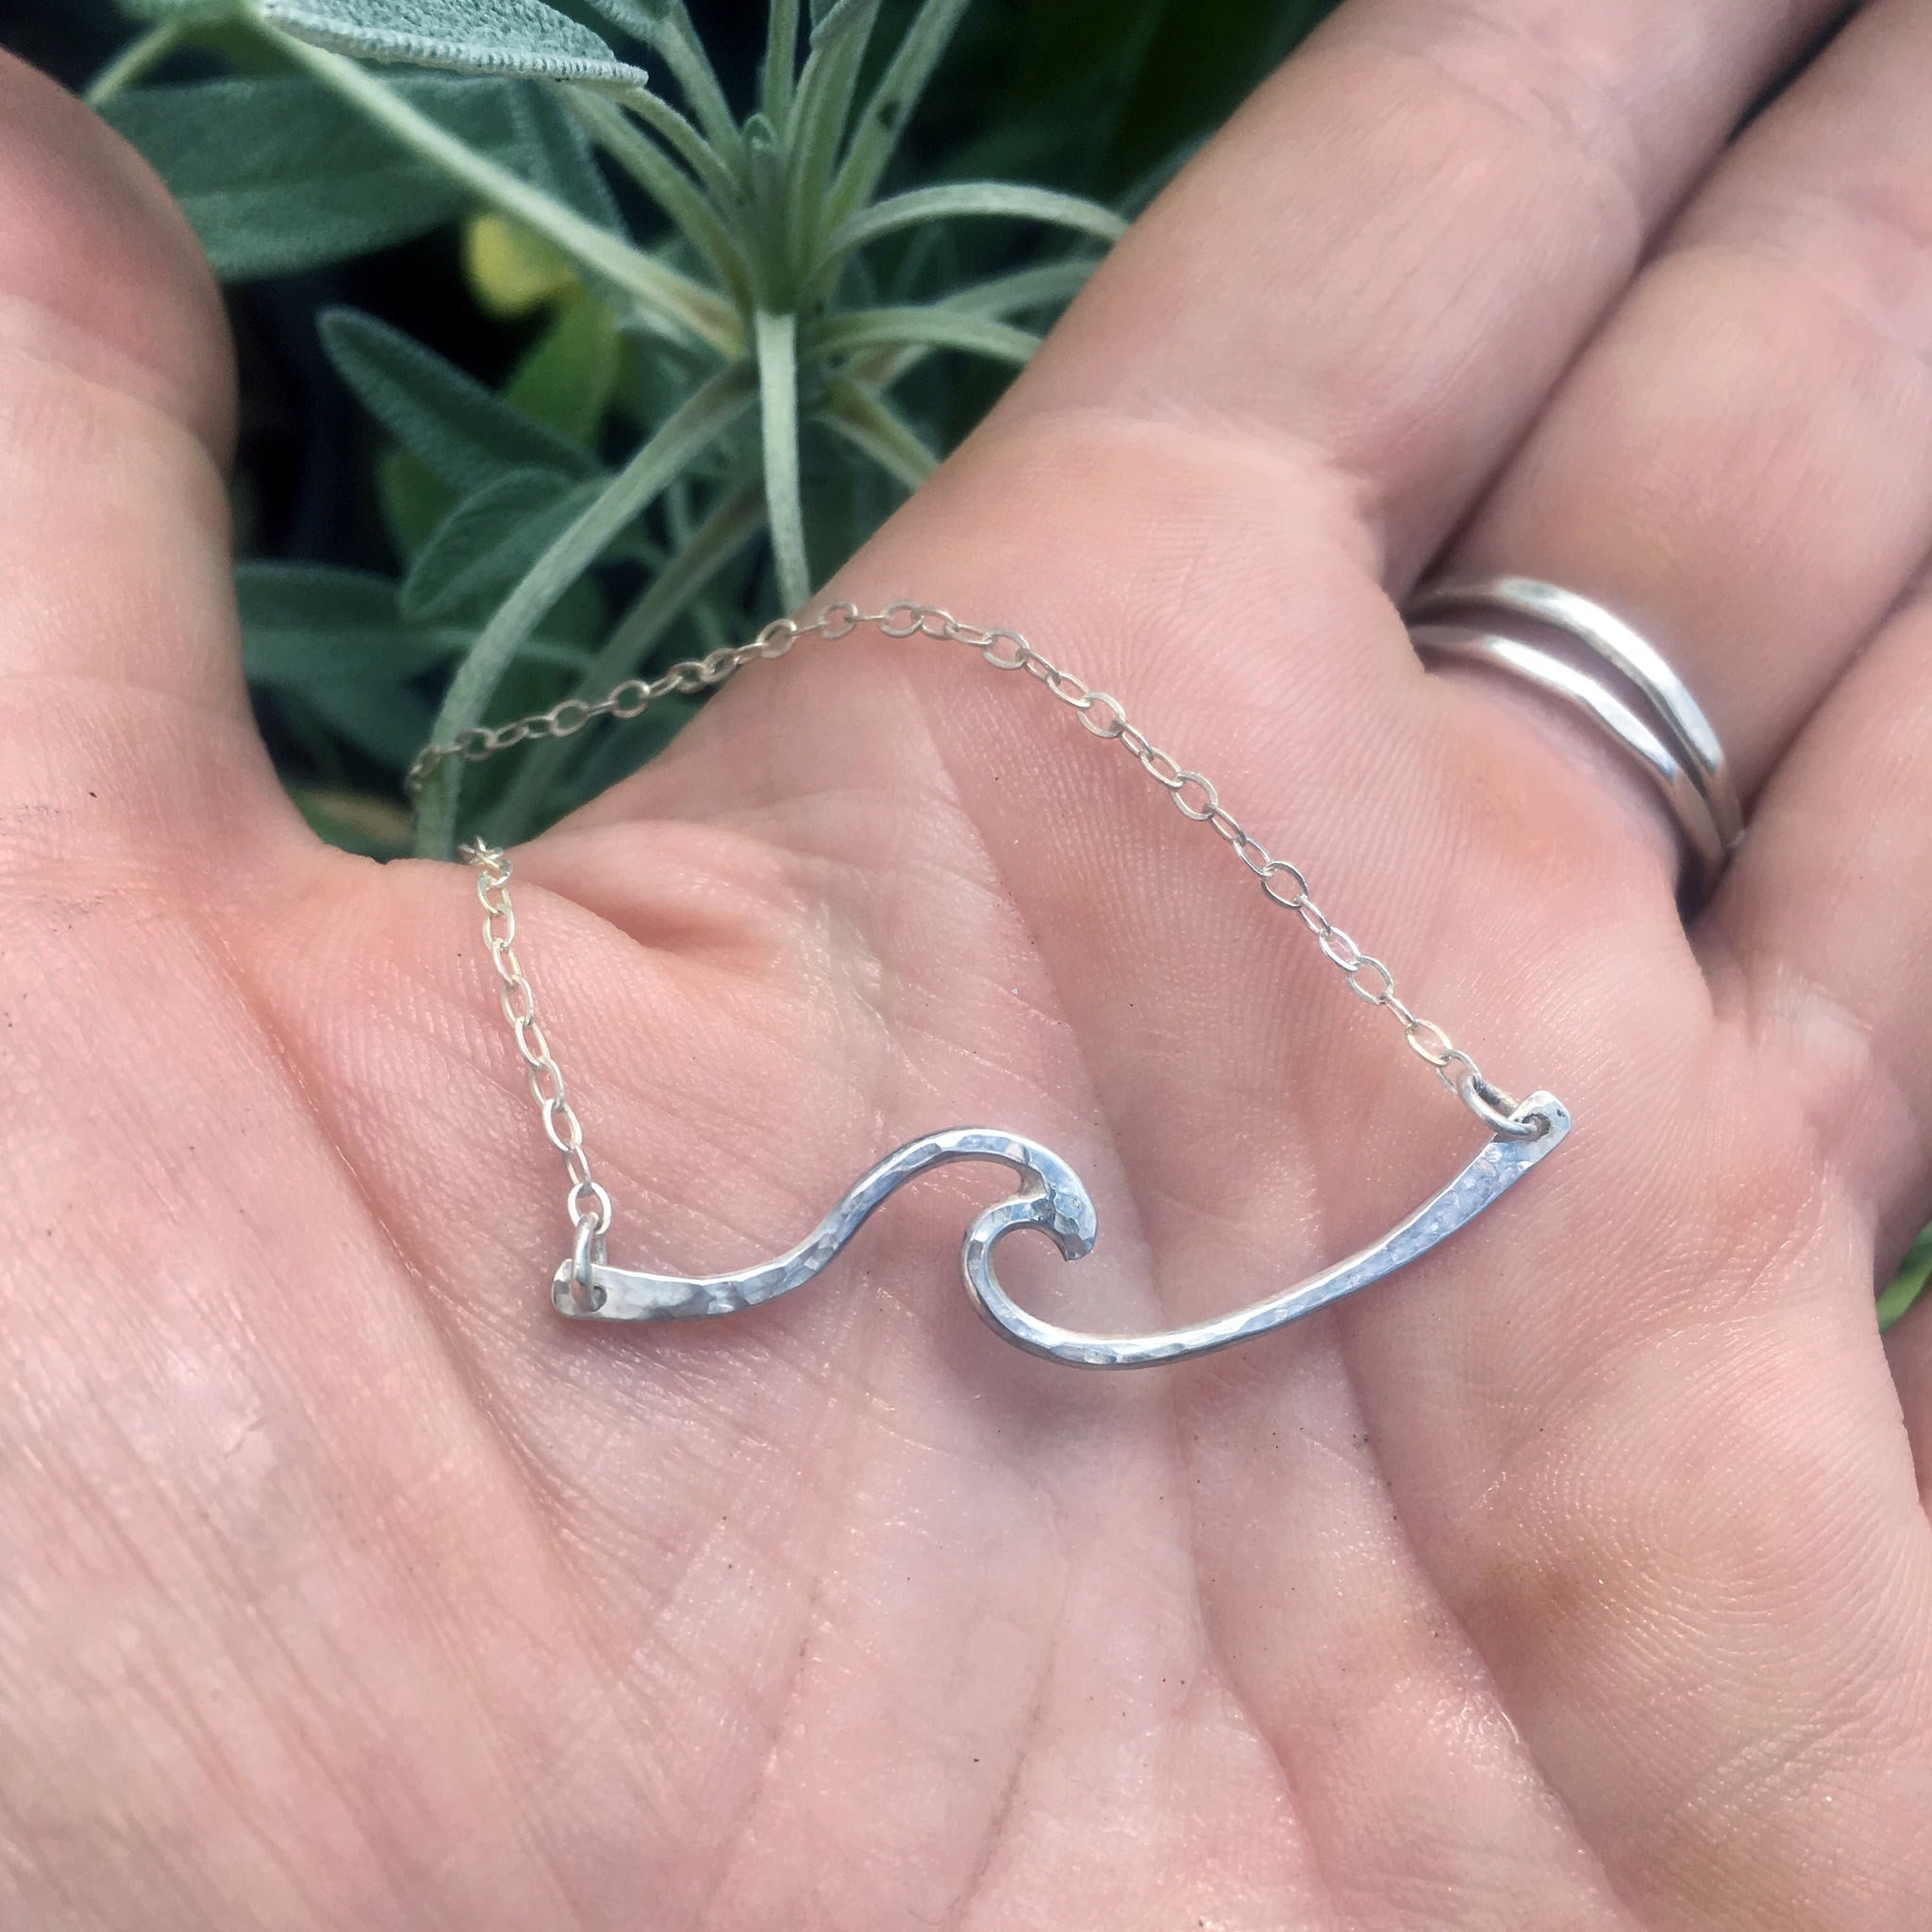 Handmade Silver Wave Necklace - Handcrafted by Lulu Bug Jewelry